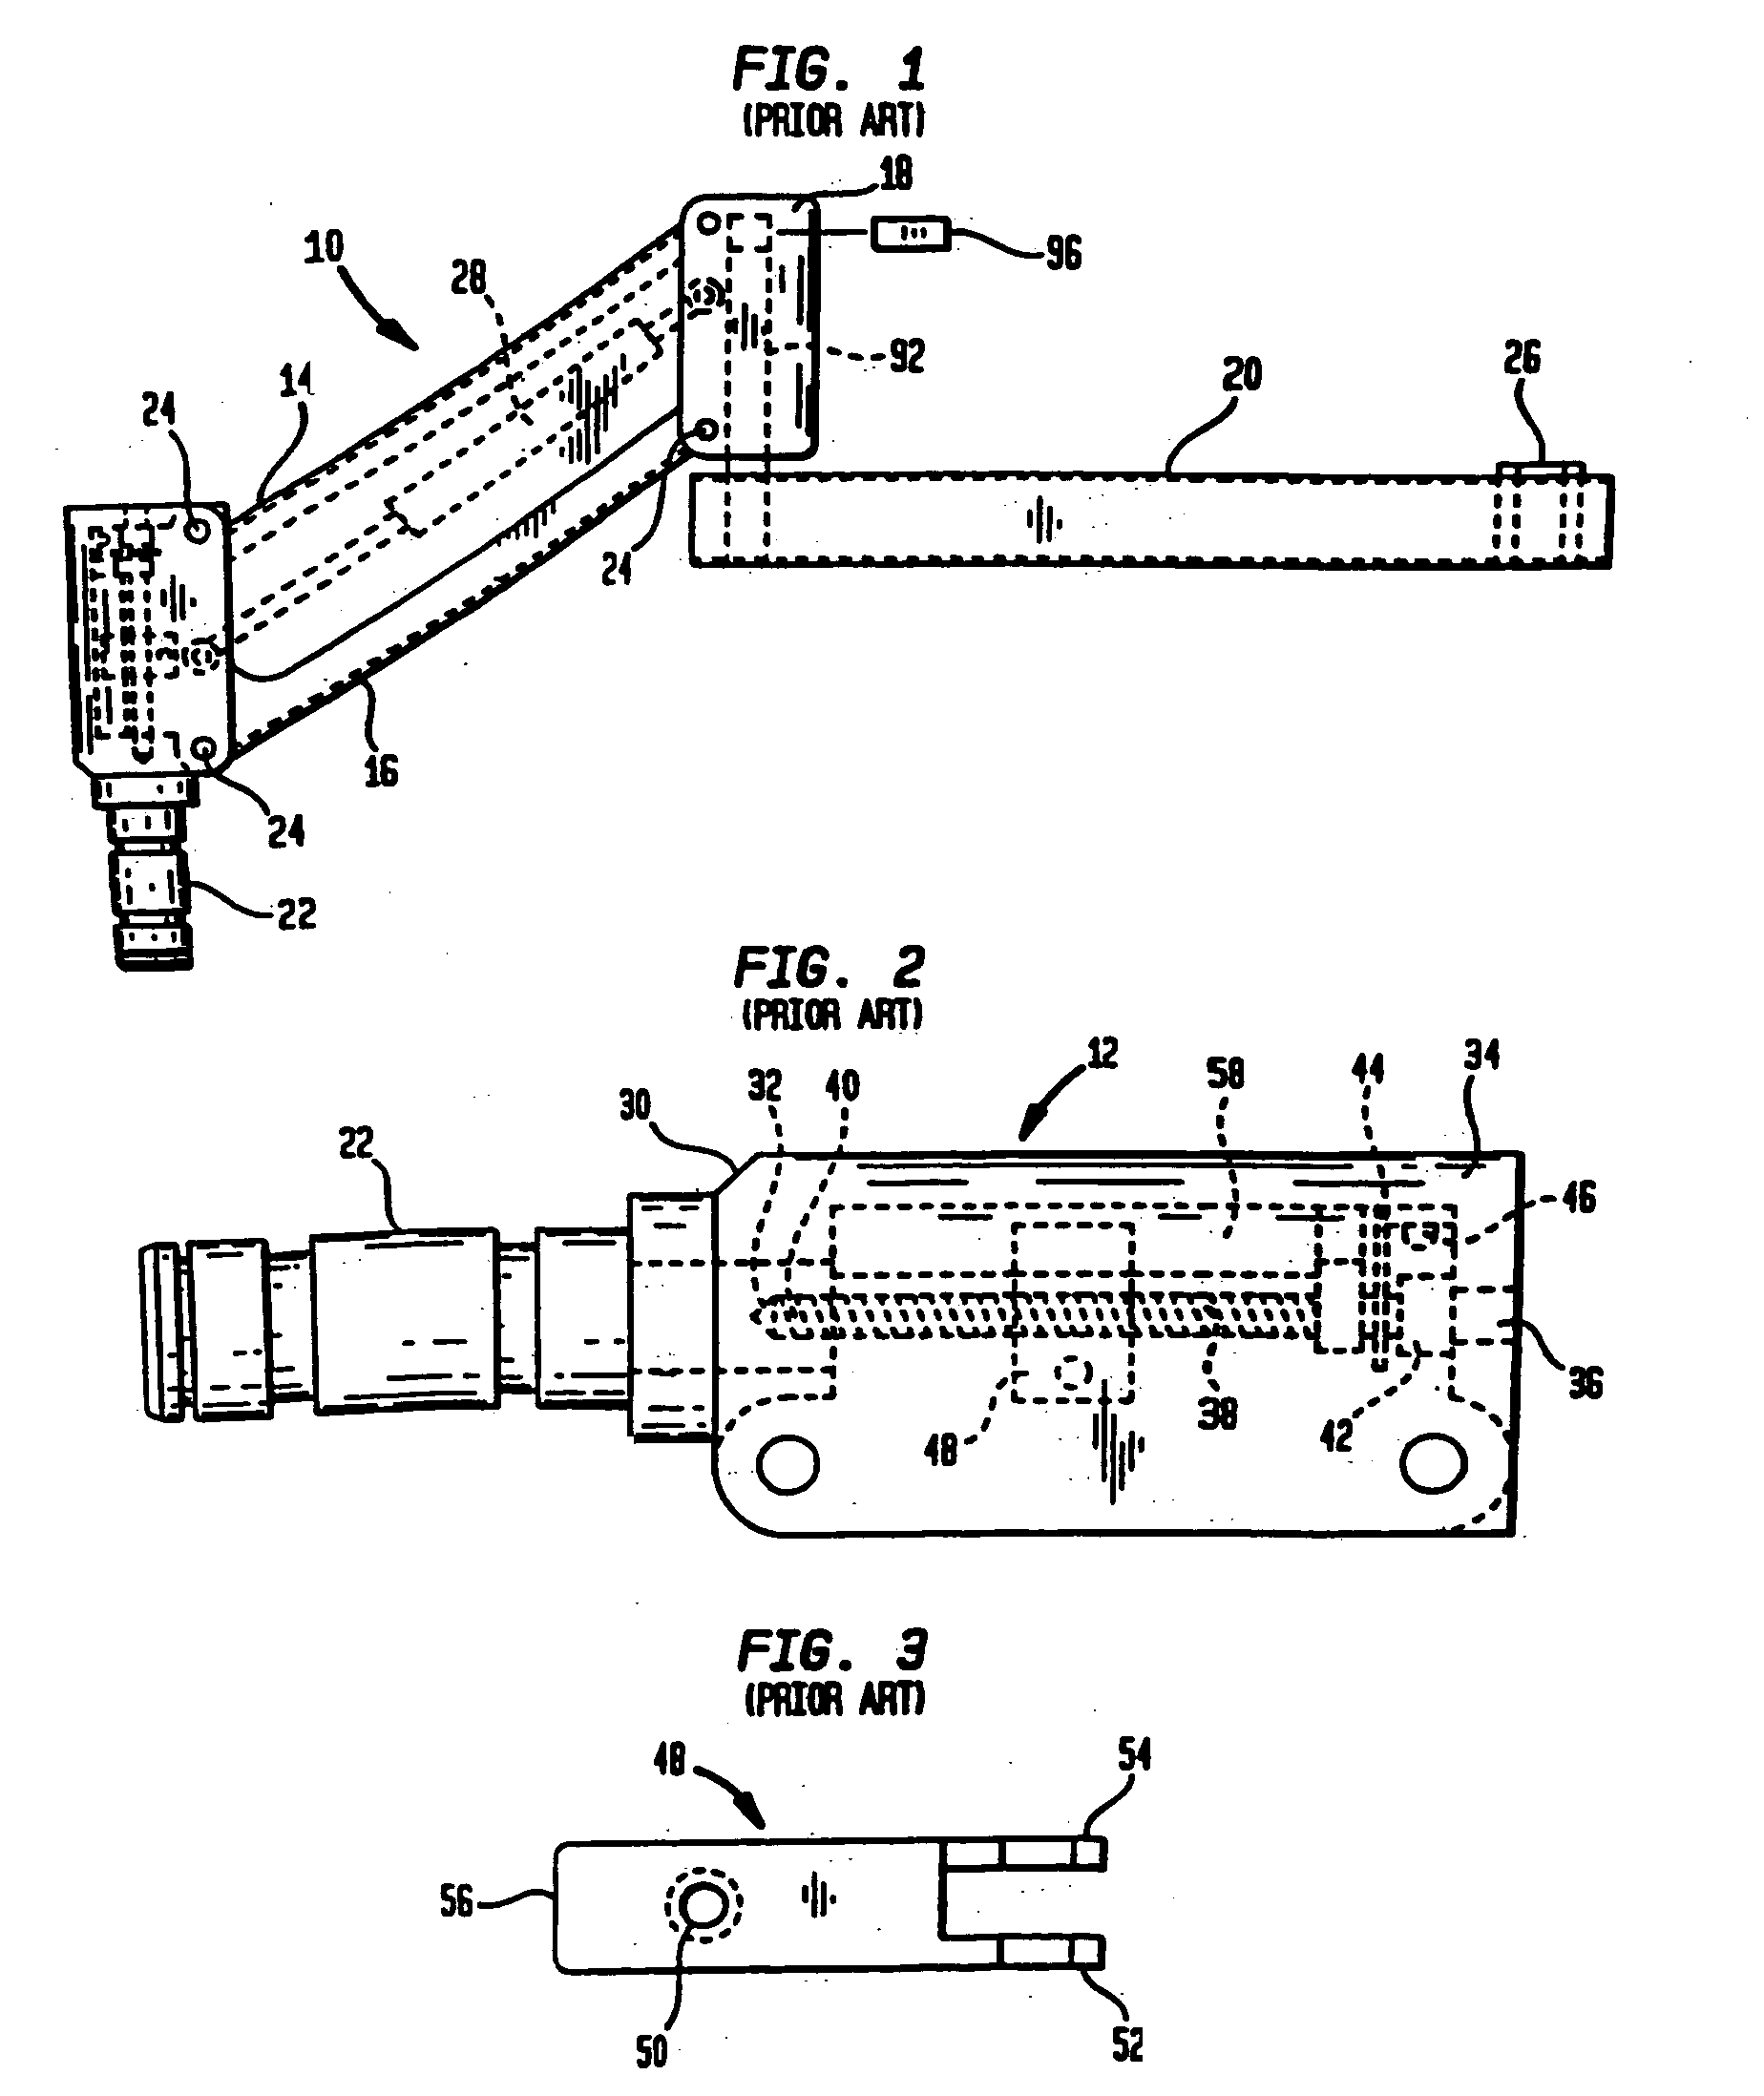 Arm apparatus for mounting electronic devices